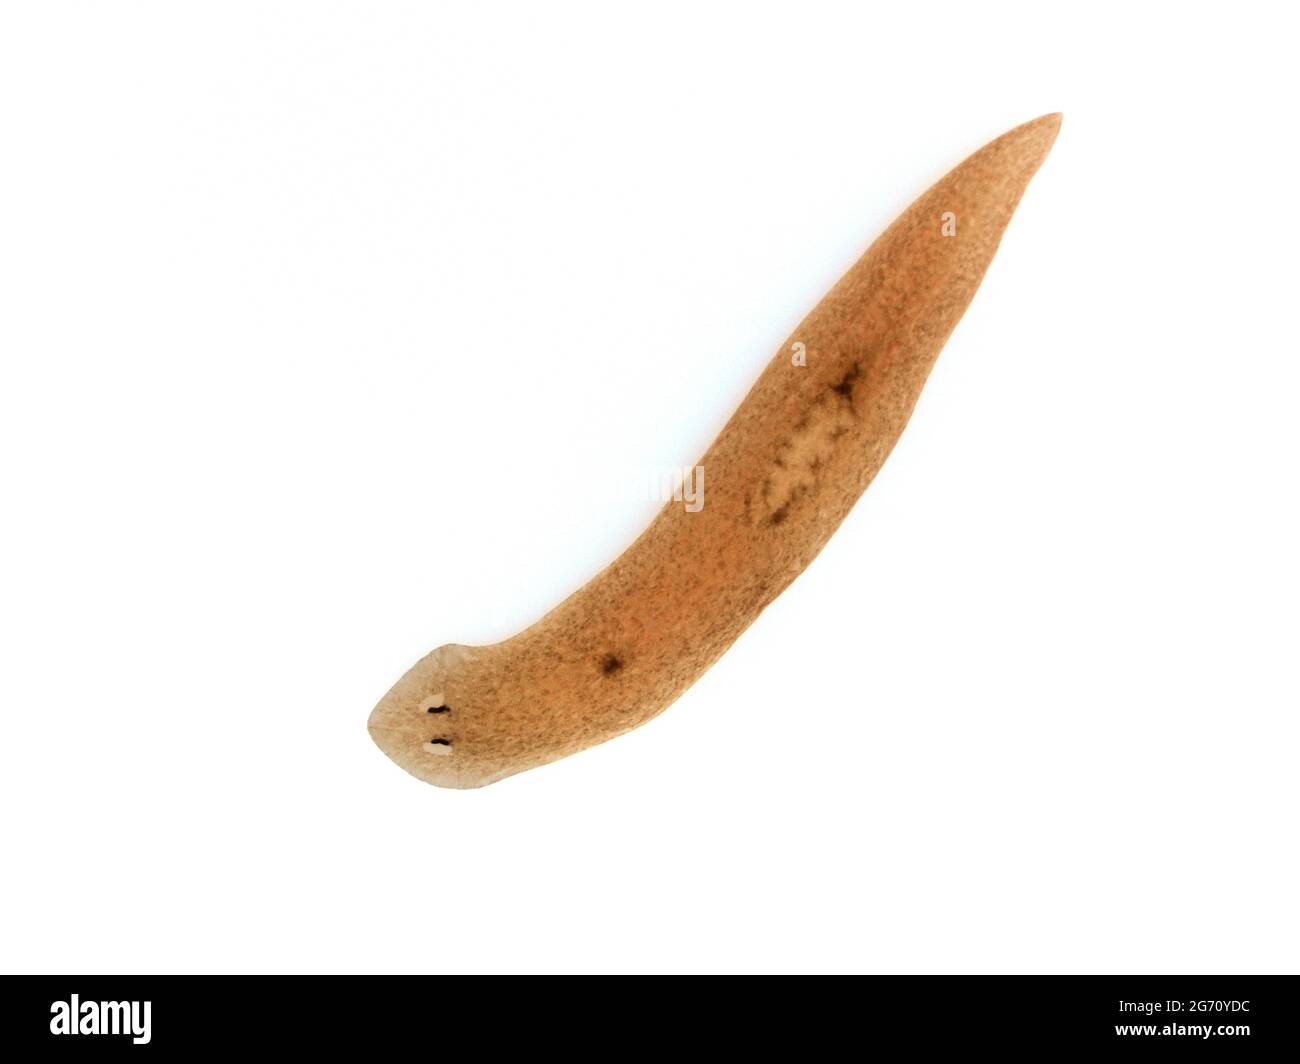 Planaria High Resolution Stock Photography and Images - Alamy